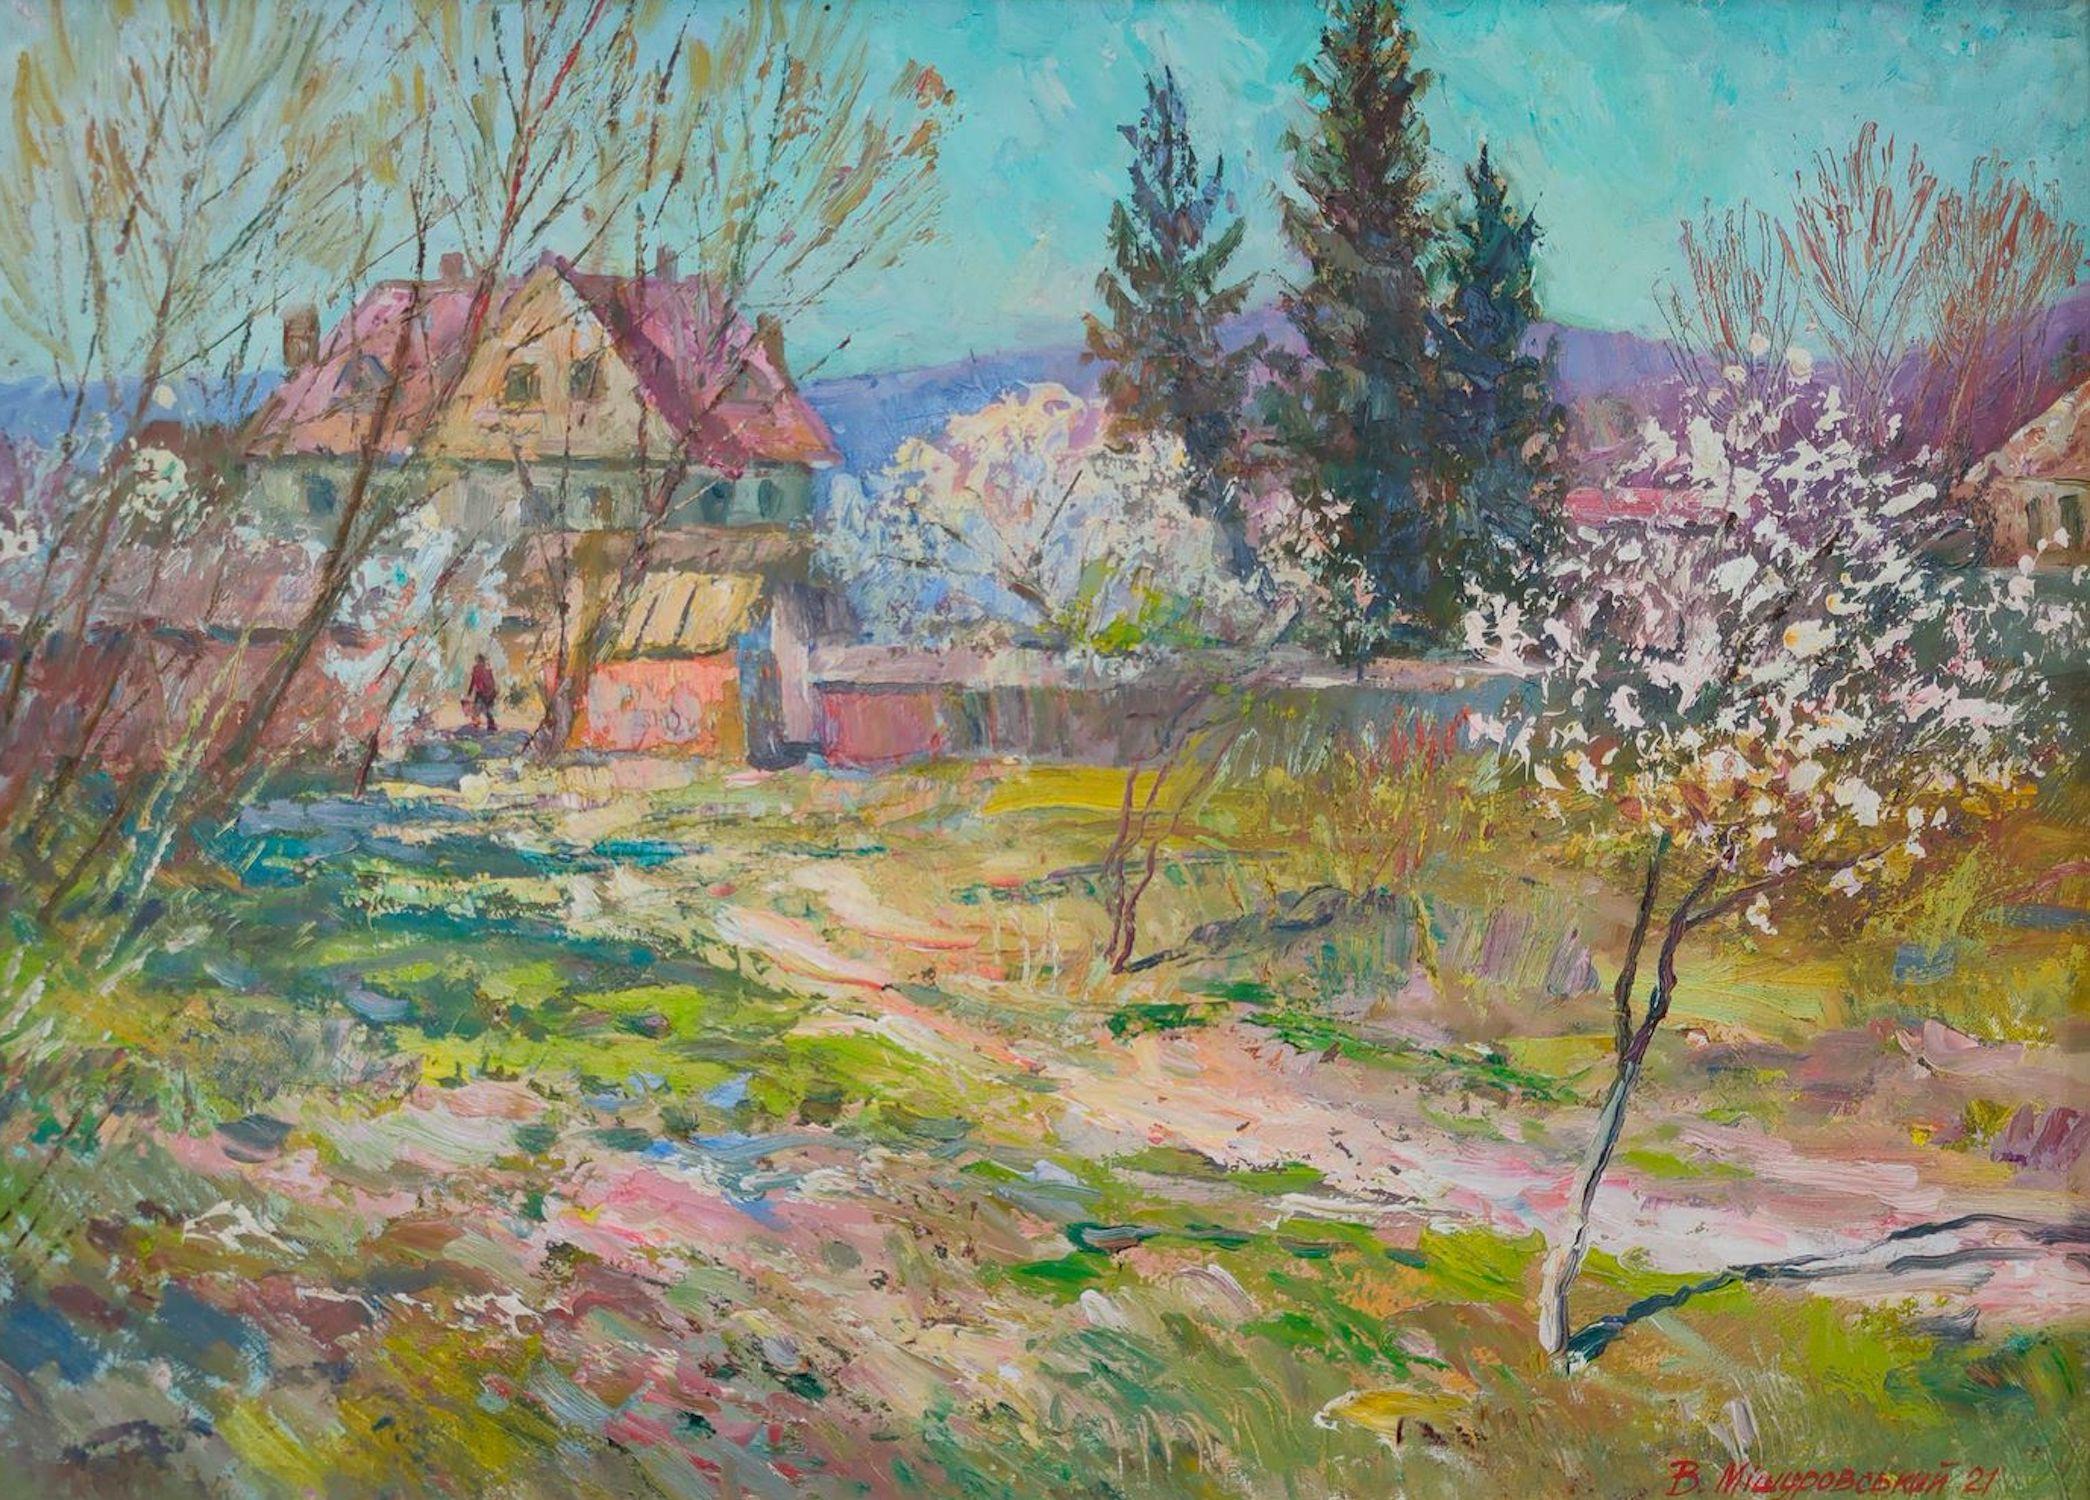 Mishurovskiy V. Landscape Painting - April in the Village, Original oil Painting, Ready to Hang